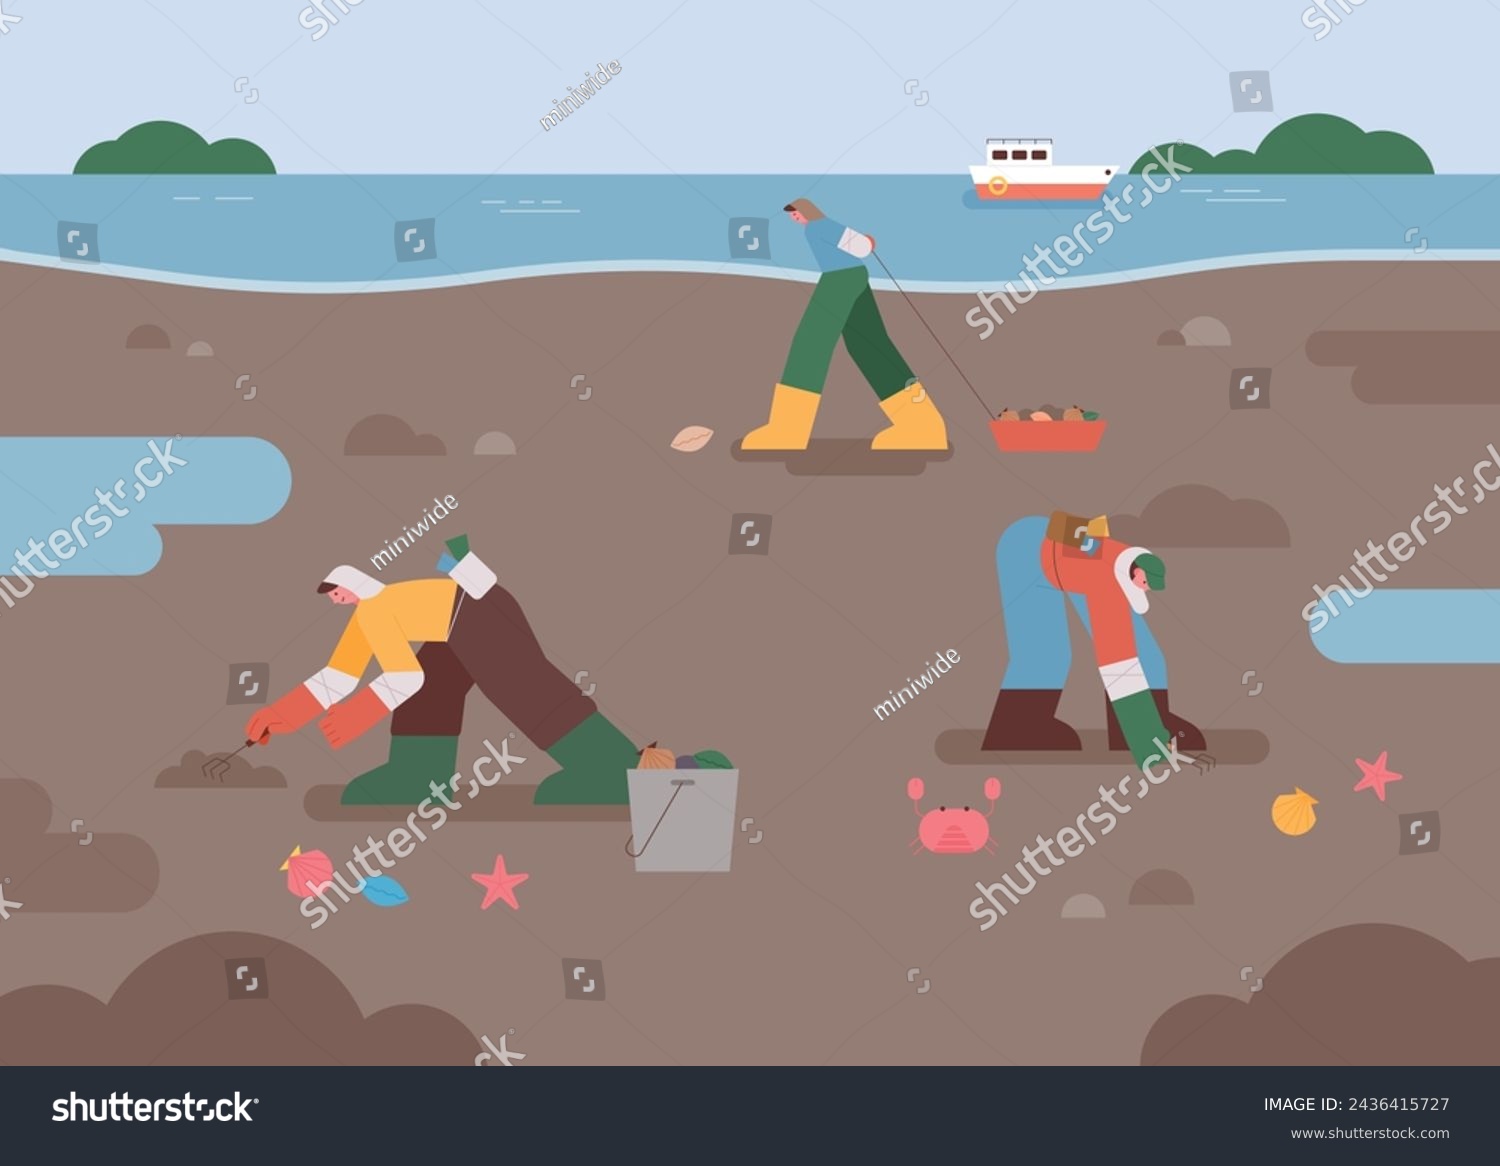 SVG of Korea's mud flat background. Fishermen are wearing work clothes and bending over to dig up clams. svg